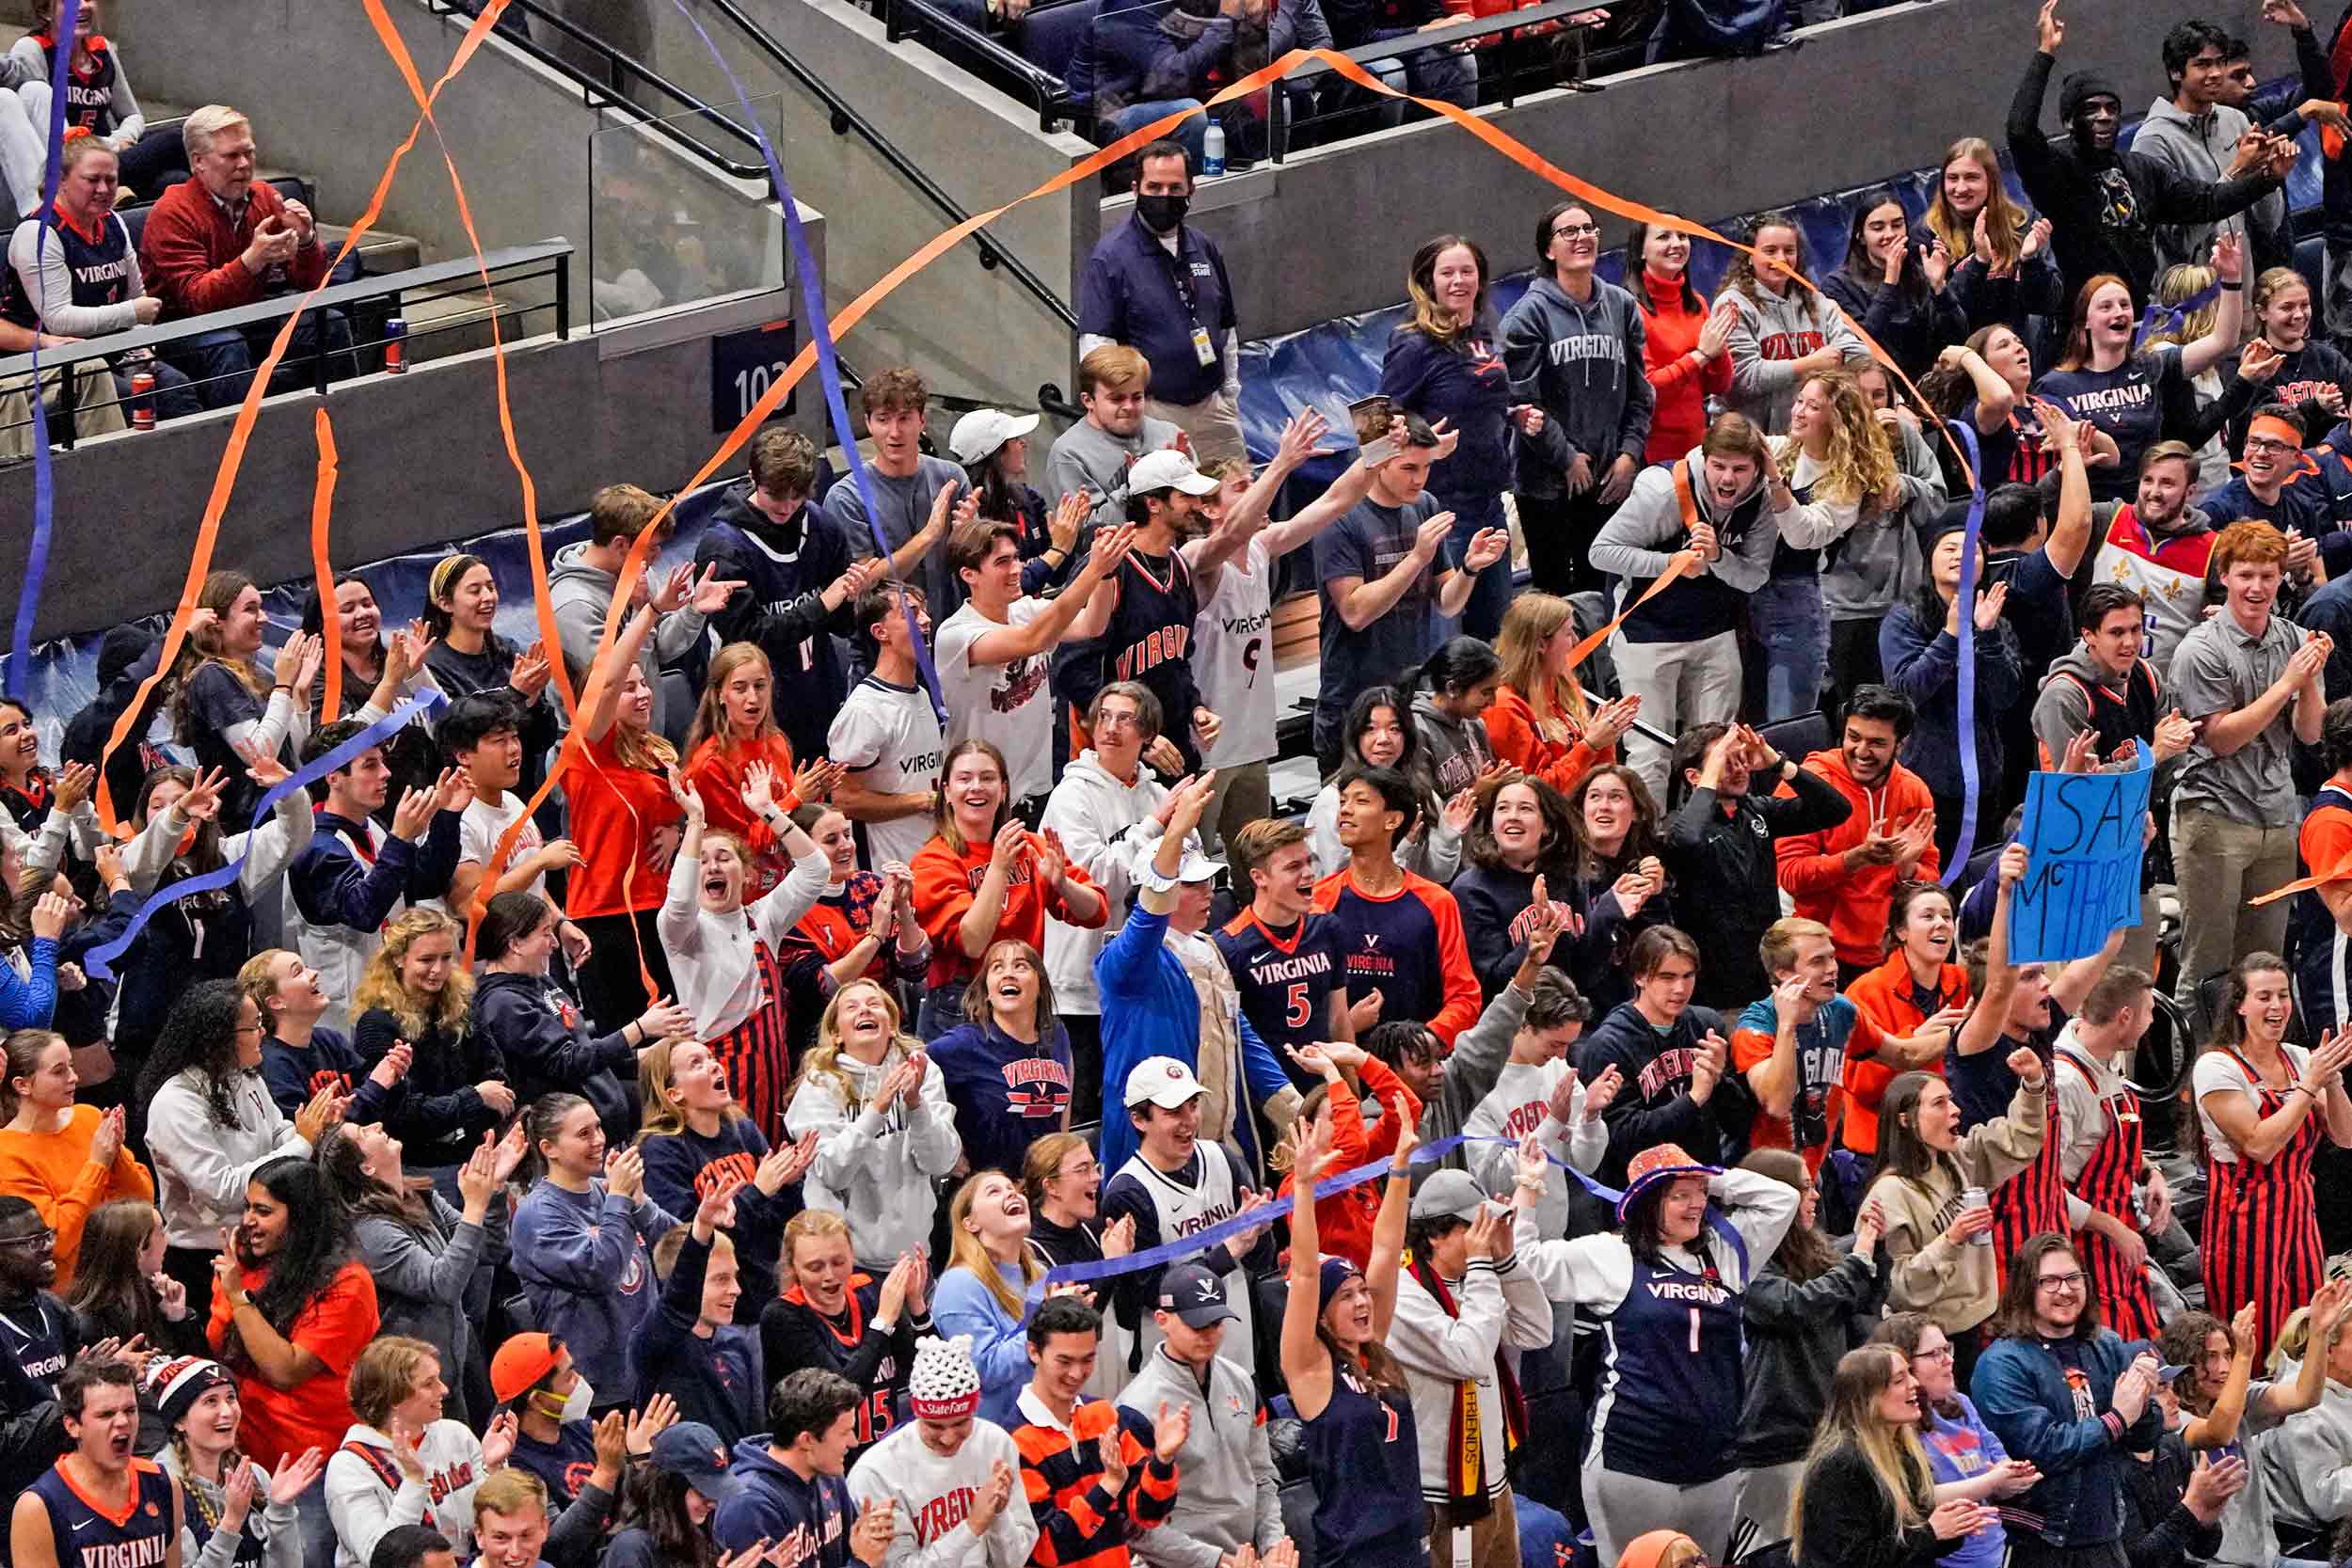 The UVA students section at a men's basketball game